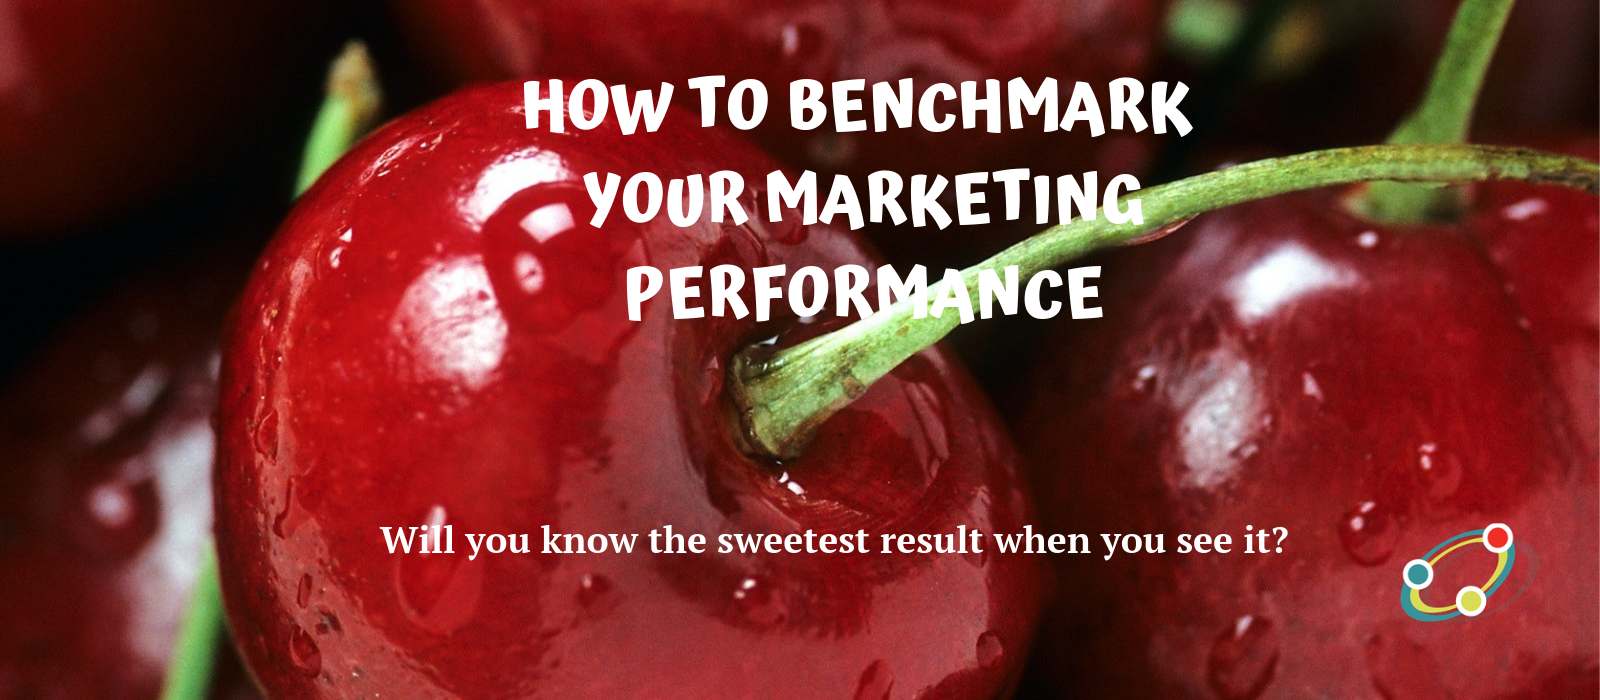 How-to-Benchmark-Your-Performance_close-up image of cherries